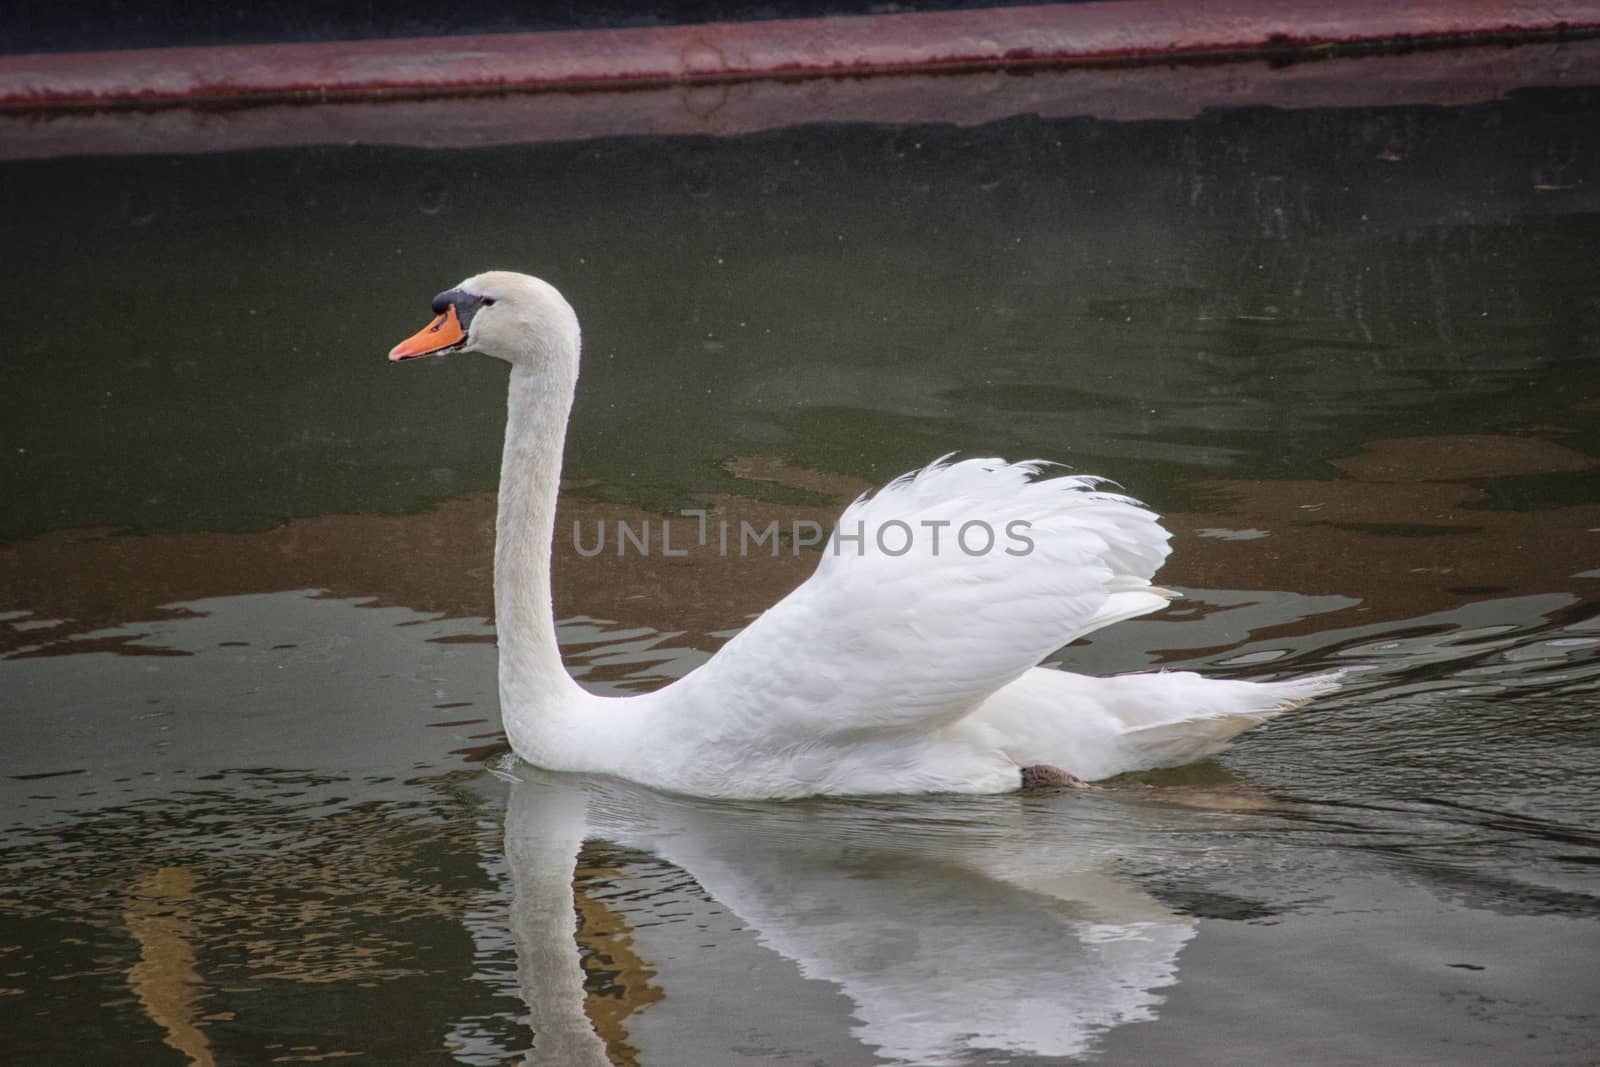 White swan in a canal